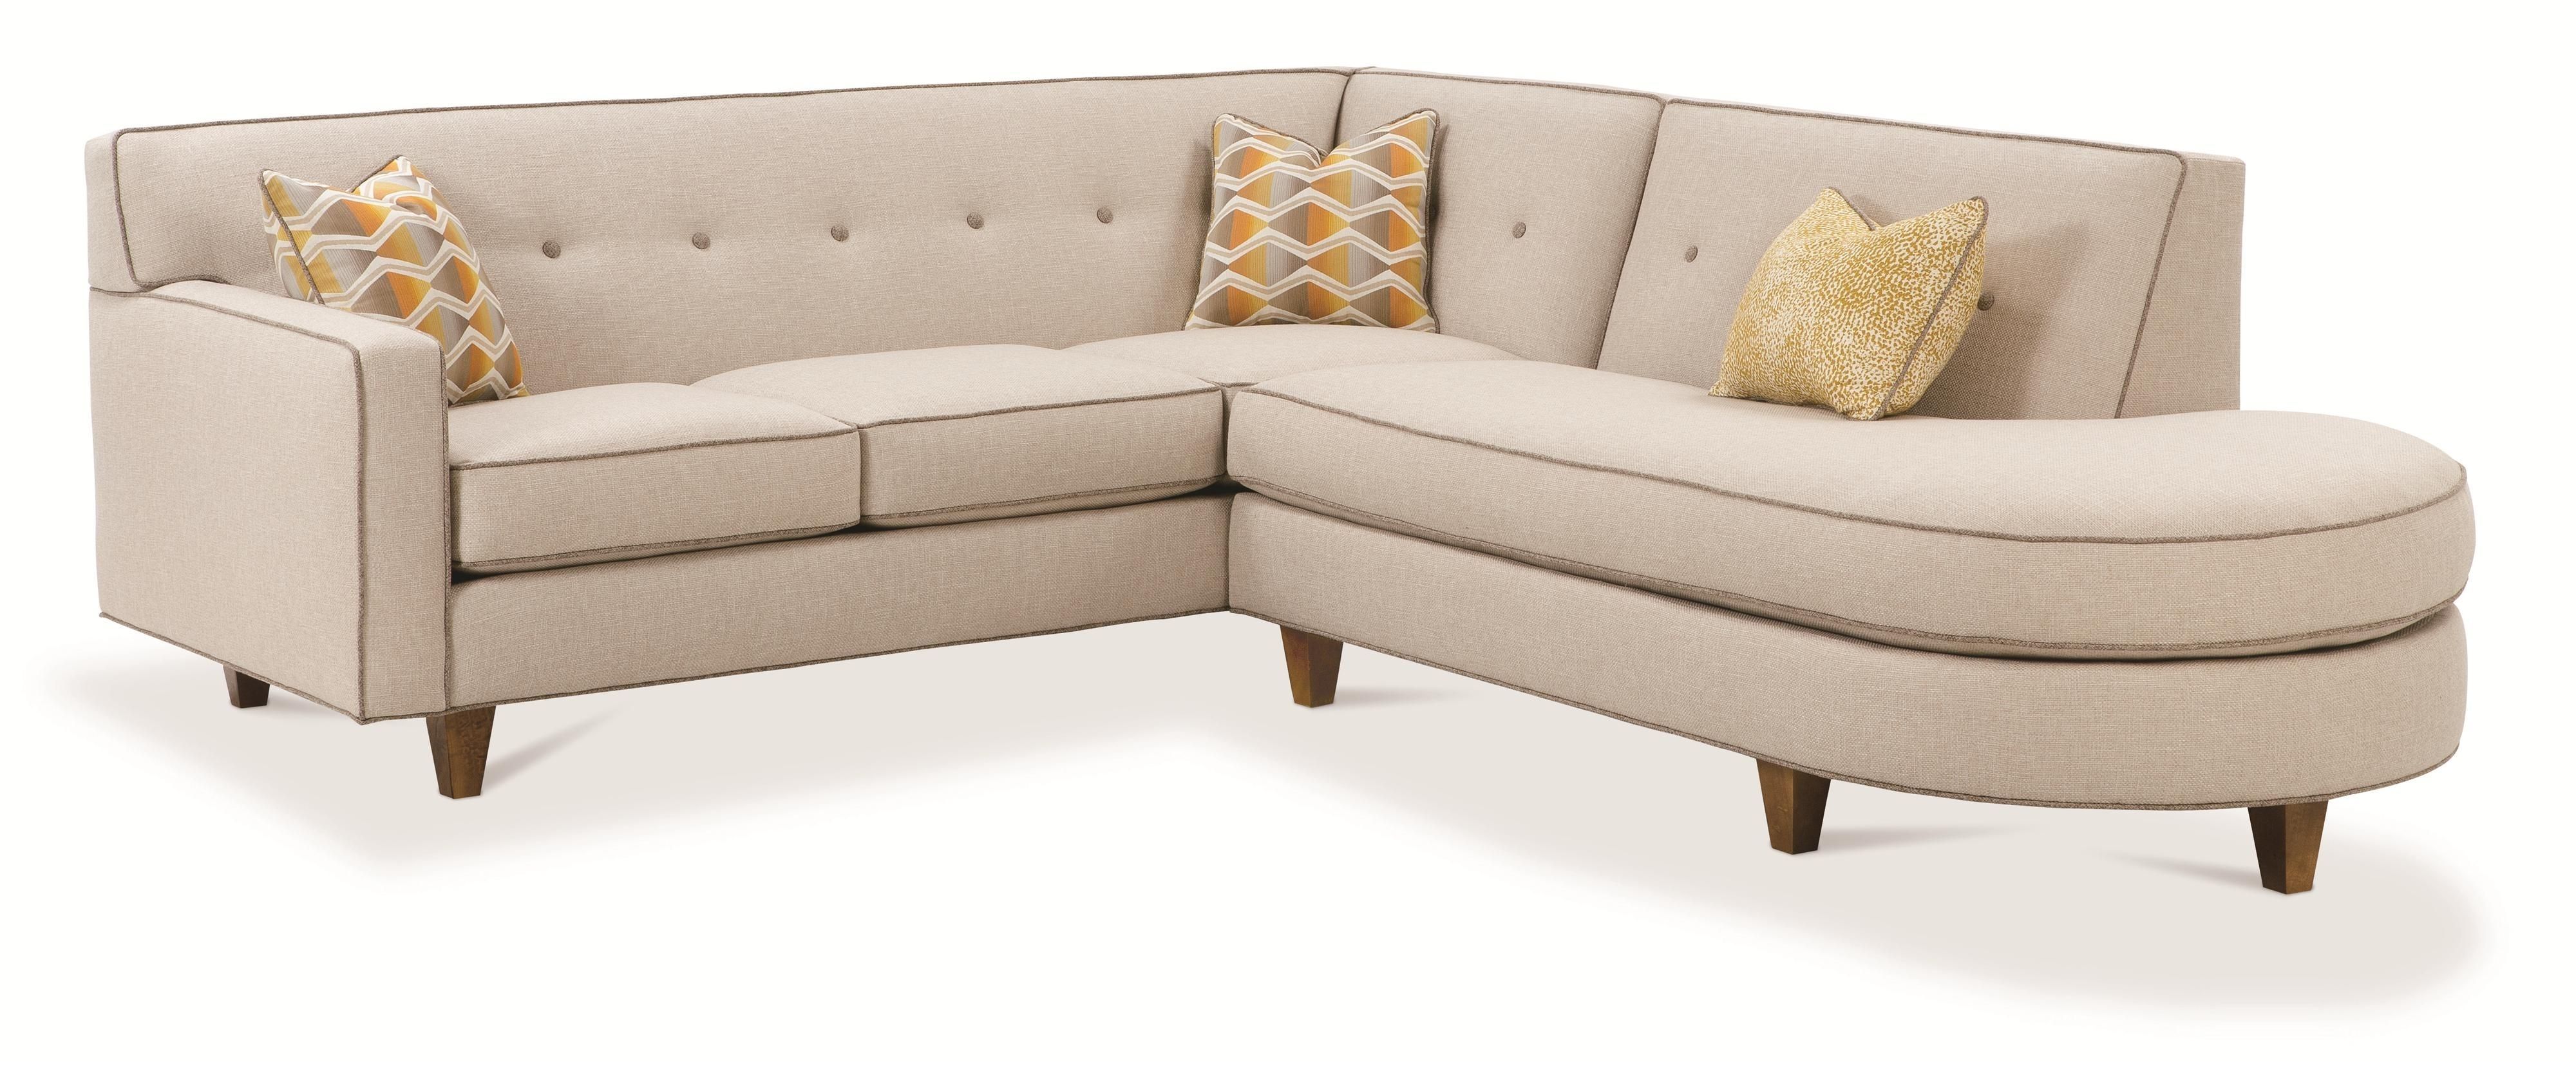 Rowe Dorset Contemporary 2 Piece Sectional Sofa | Baer's Furniture With Regard To Naples Fl Sectional Sofas (View 8 of 10)